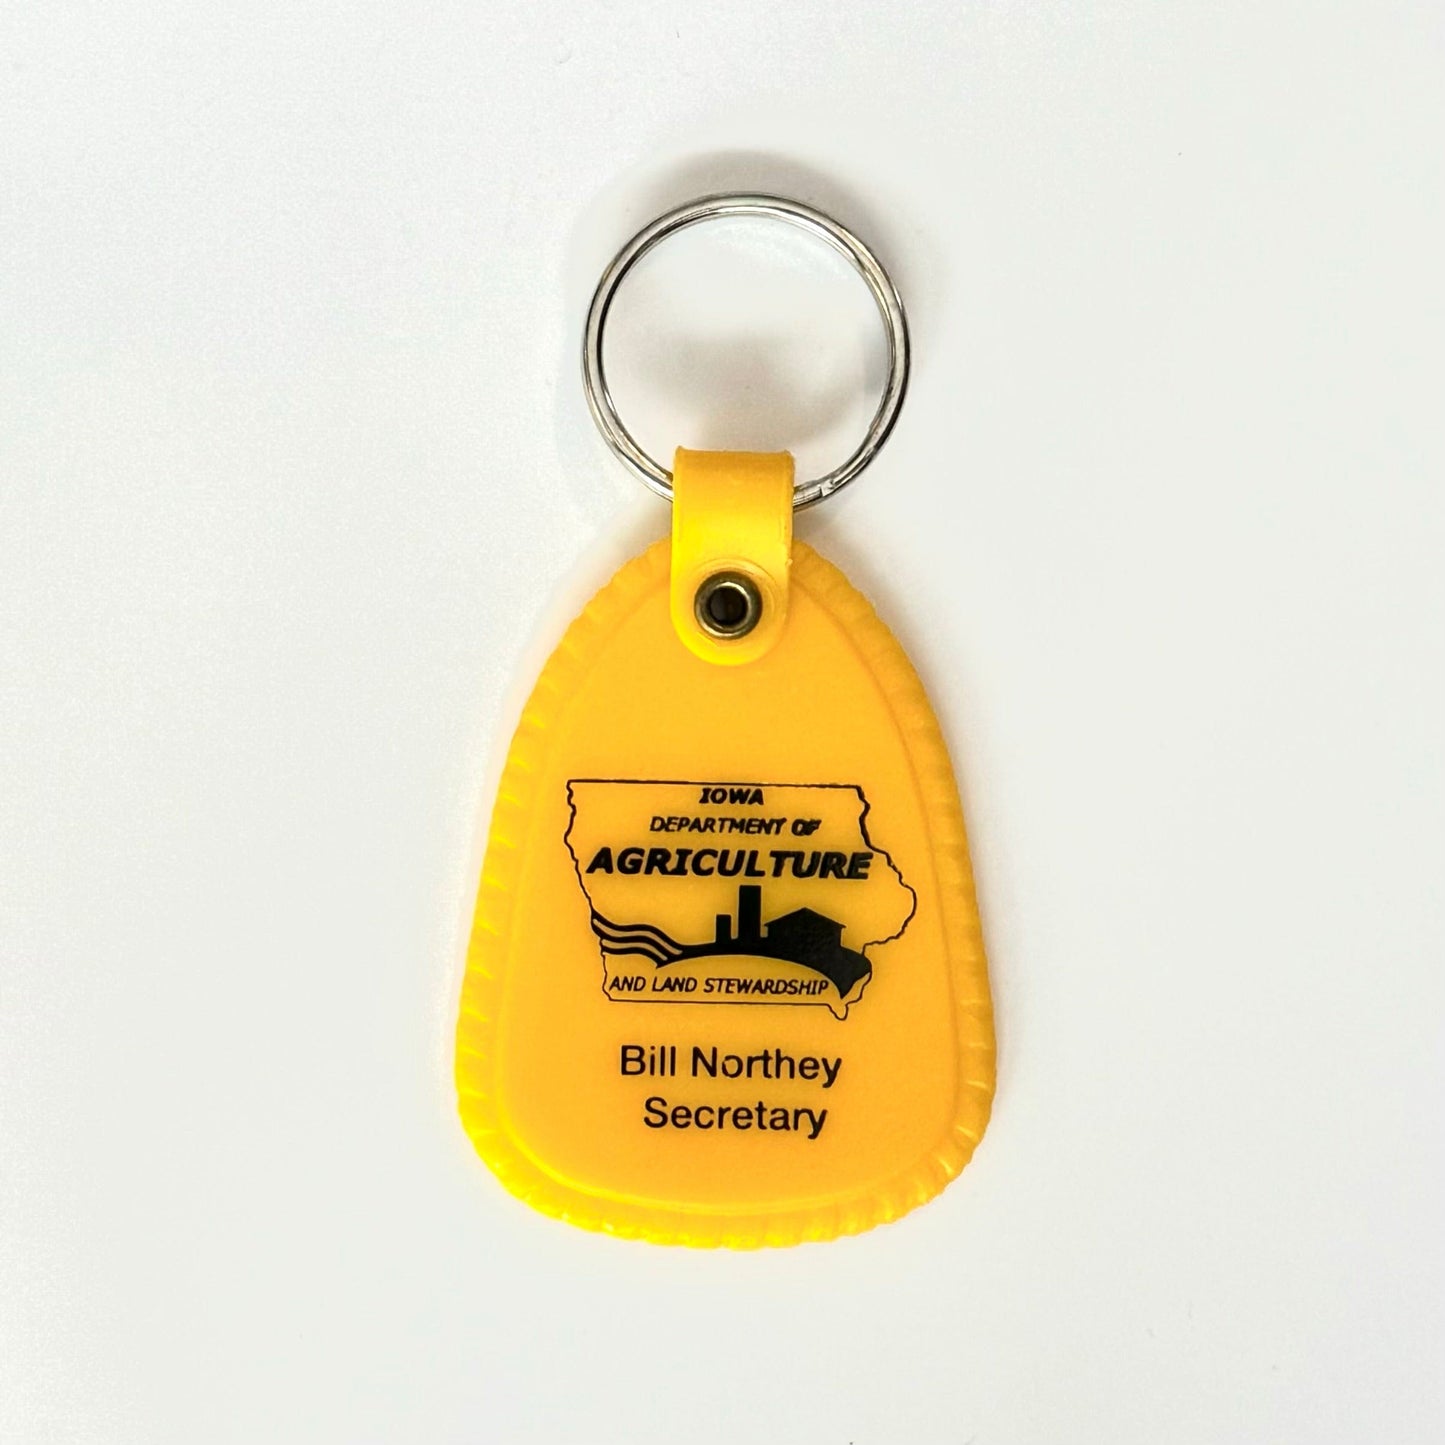 Iowa Dept Of Agriculture/Bill Northey (Set of 3) Yellow Keychains Key Rings